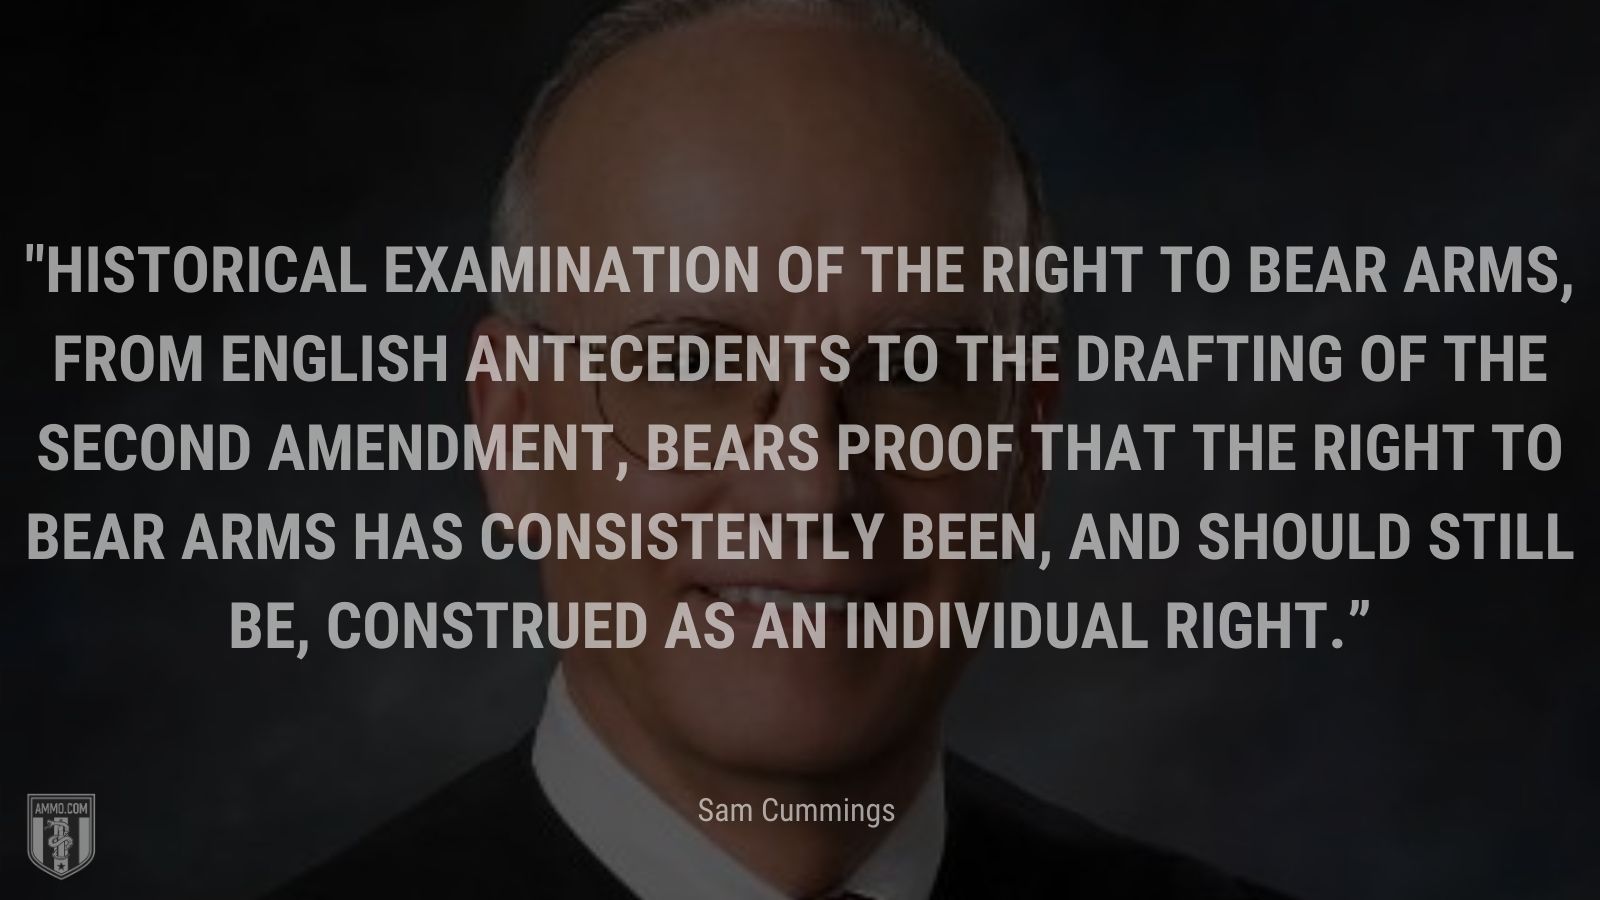 “Historical examination of the right to bear arms, from English antecedents to the drafting of the Second Amendment, bears proof that the right to bear arms has consistently been, and should still be, construed as an individual right” - Sam Cummings